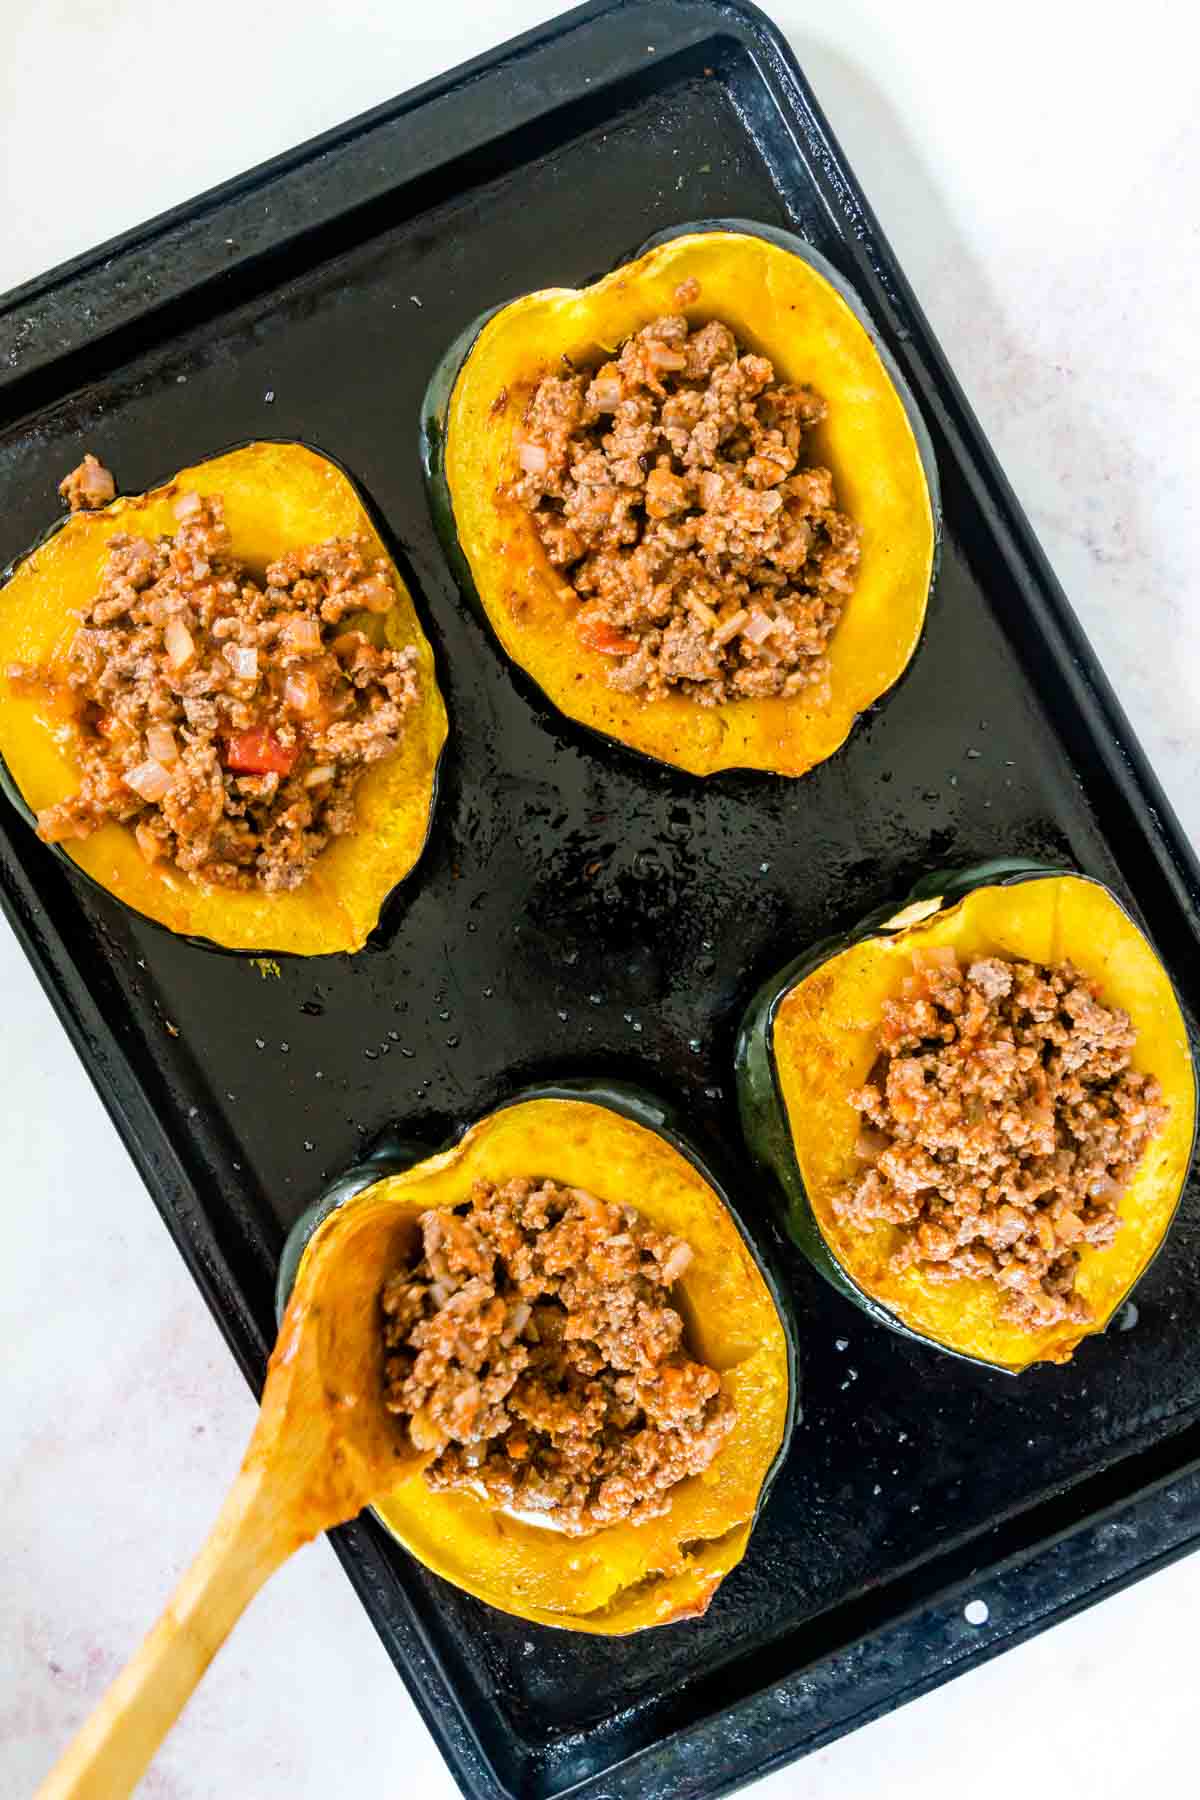 Italian meat sauce being spooned into the roasted acorn squash halves on a sheet pan.